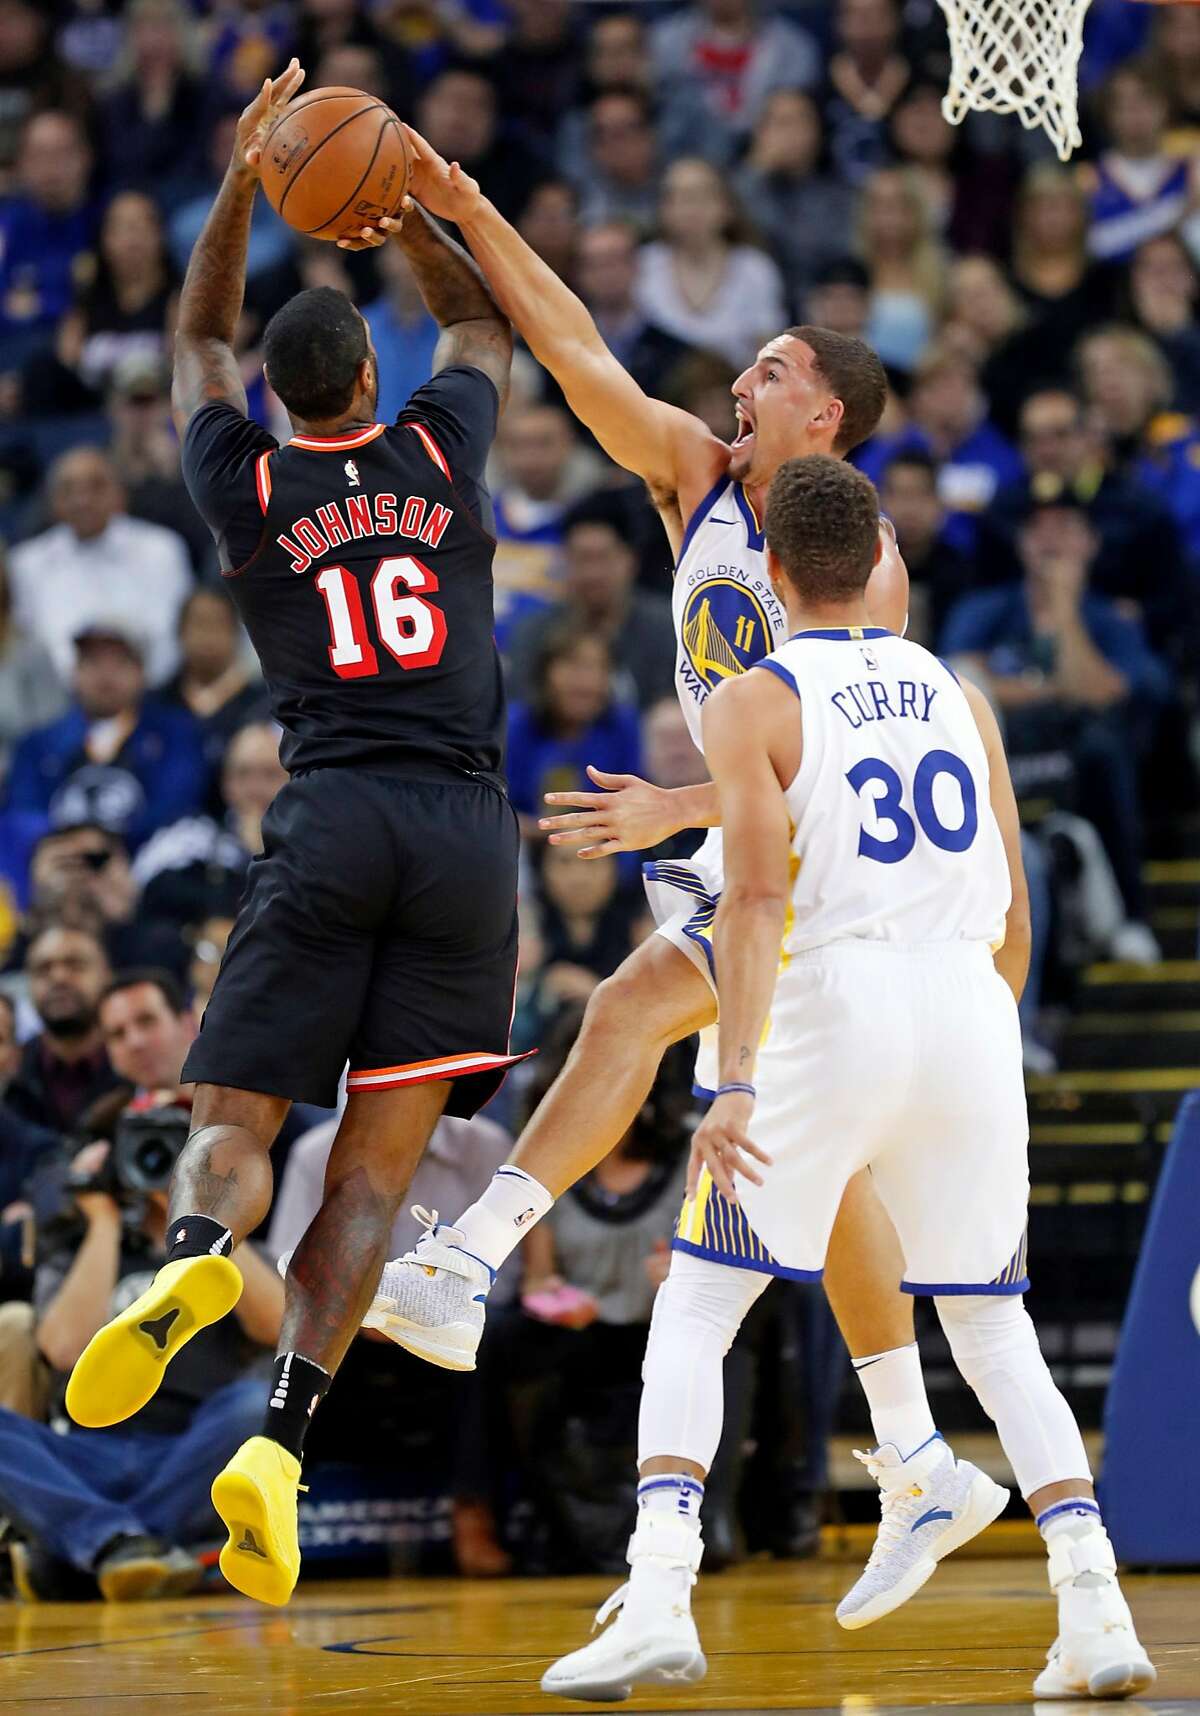 Golden State Warriors' Klay Thompson blocks a shot by Miami Heat's James Johnson in 1st quarter during NBA game at Oracle Arena in Oakland, Calif., on Monday, November 6, 2017.